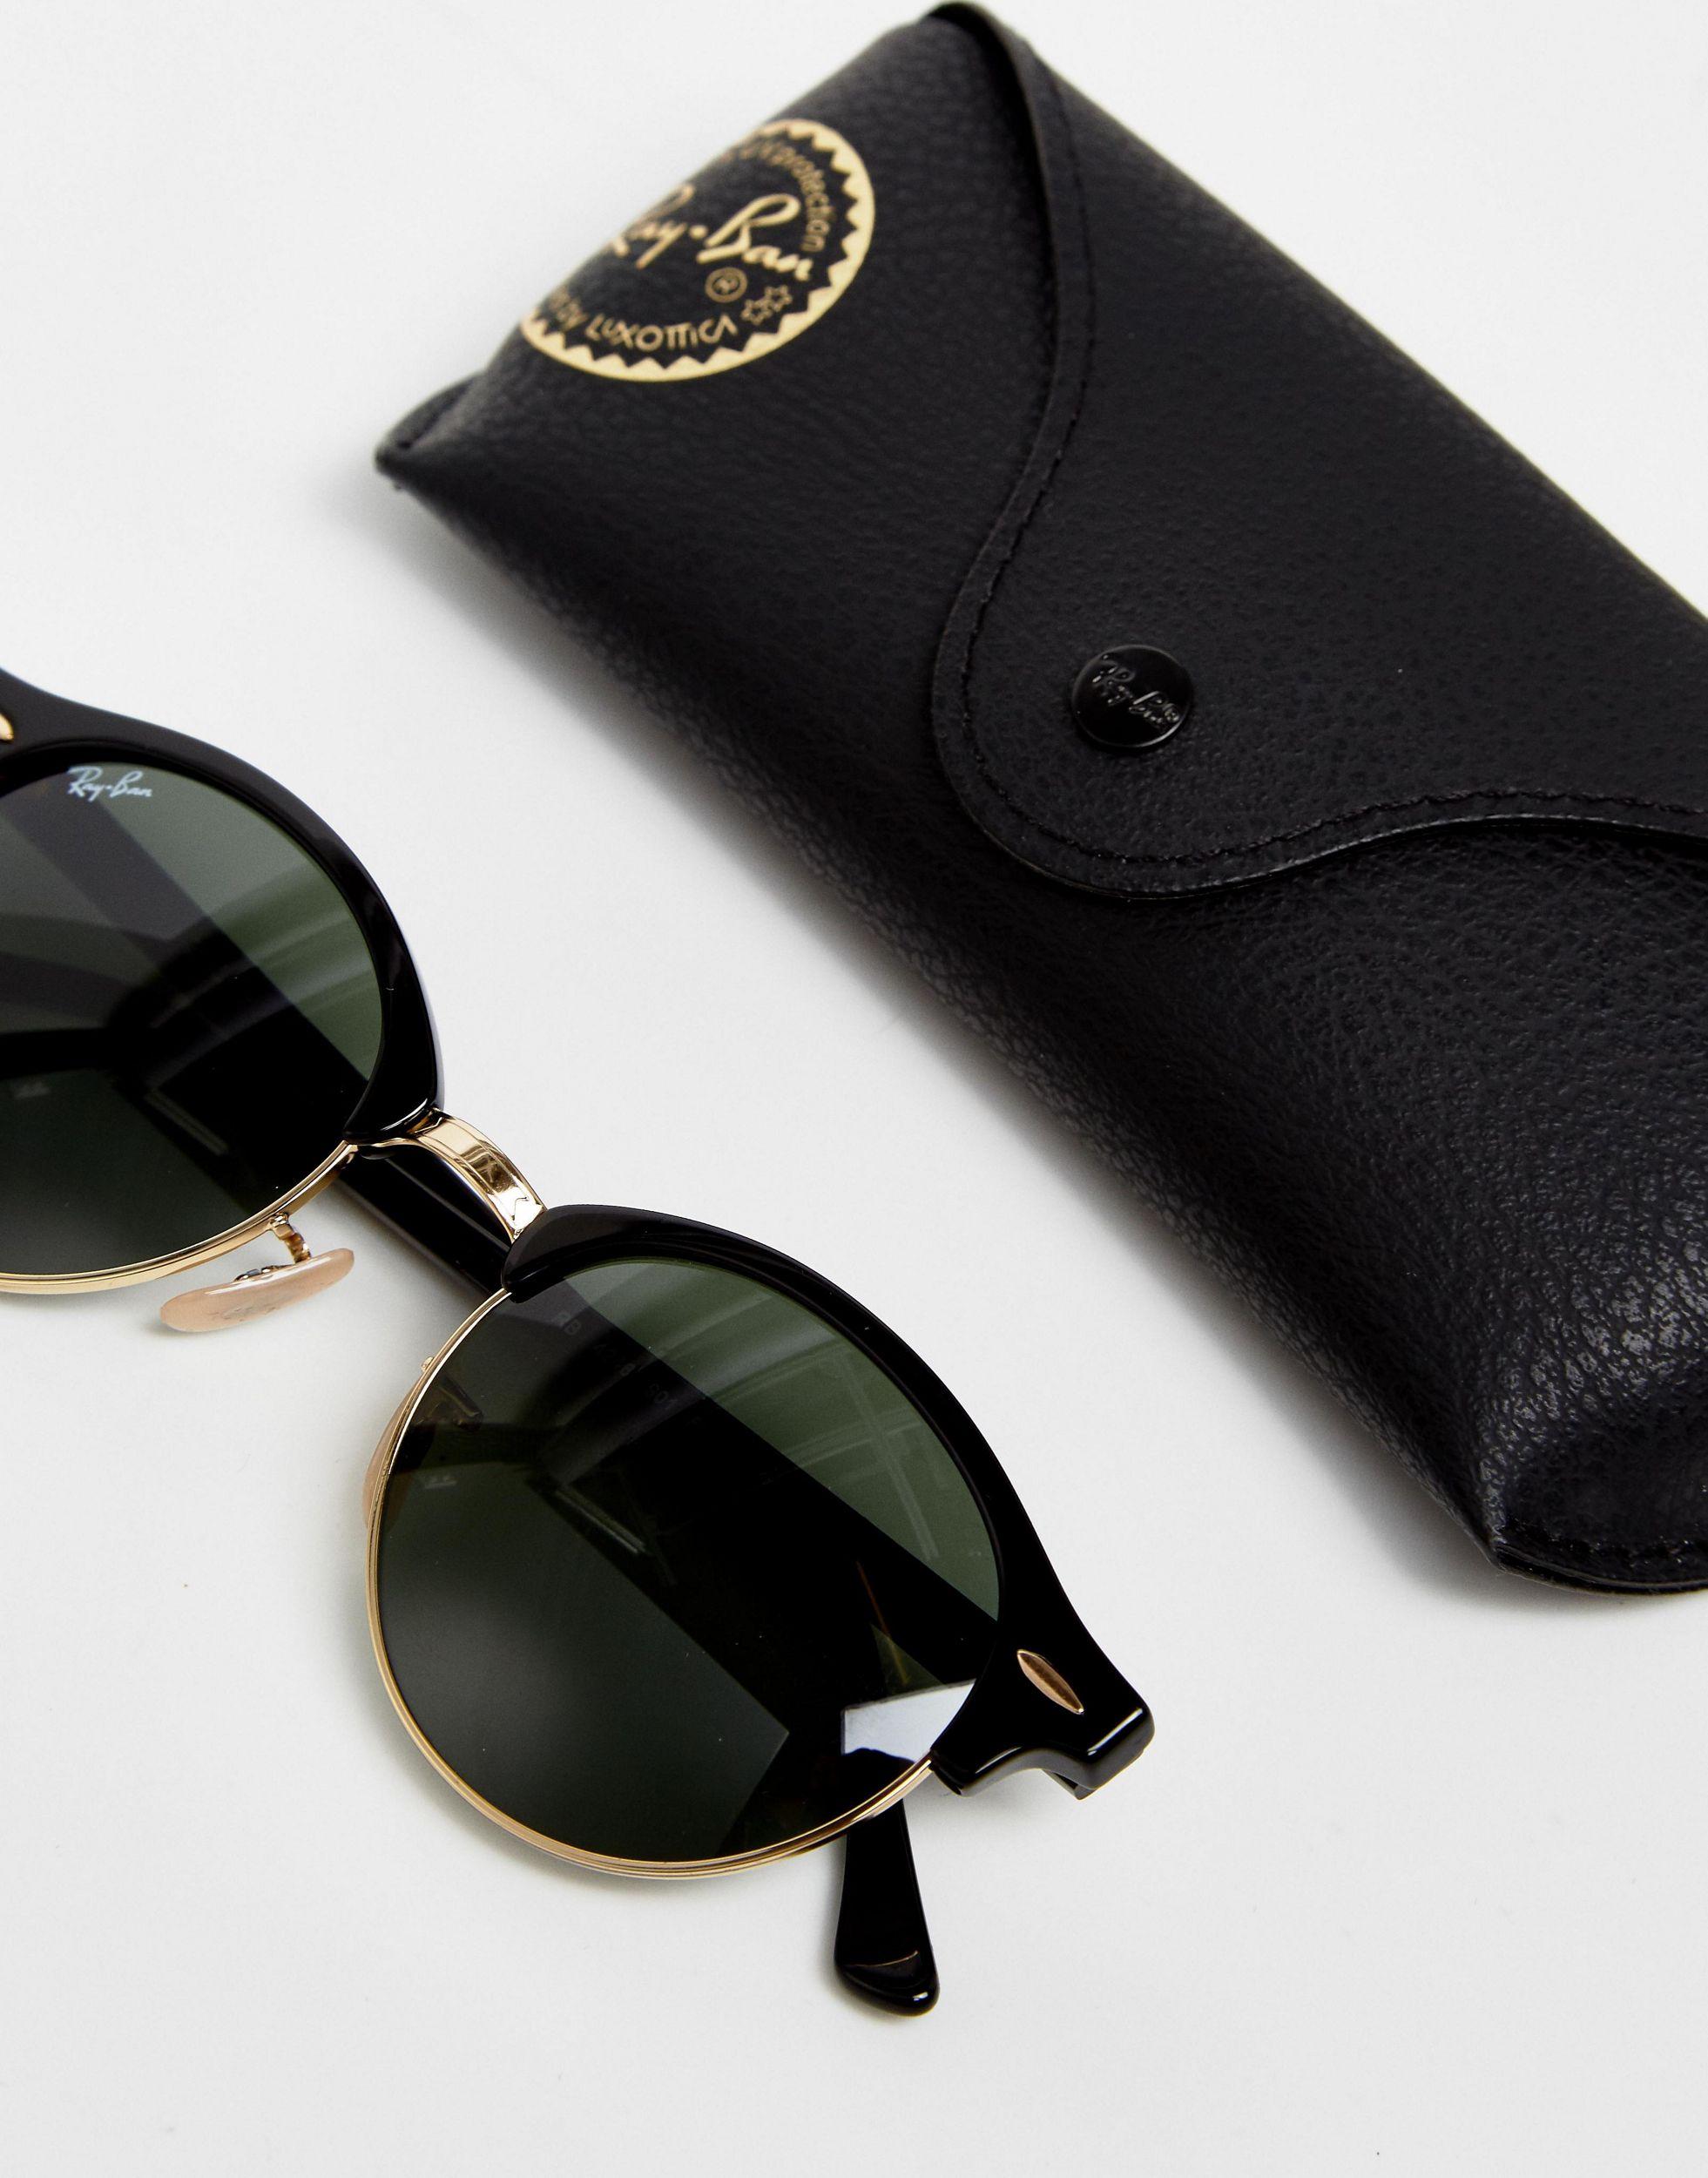 ray ban clubmaster round